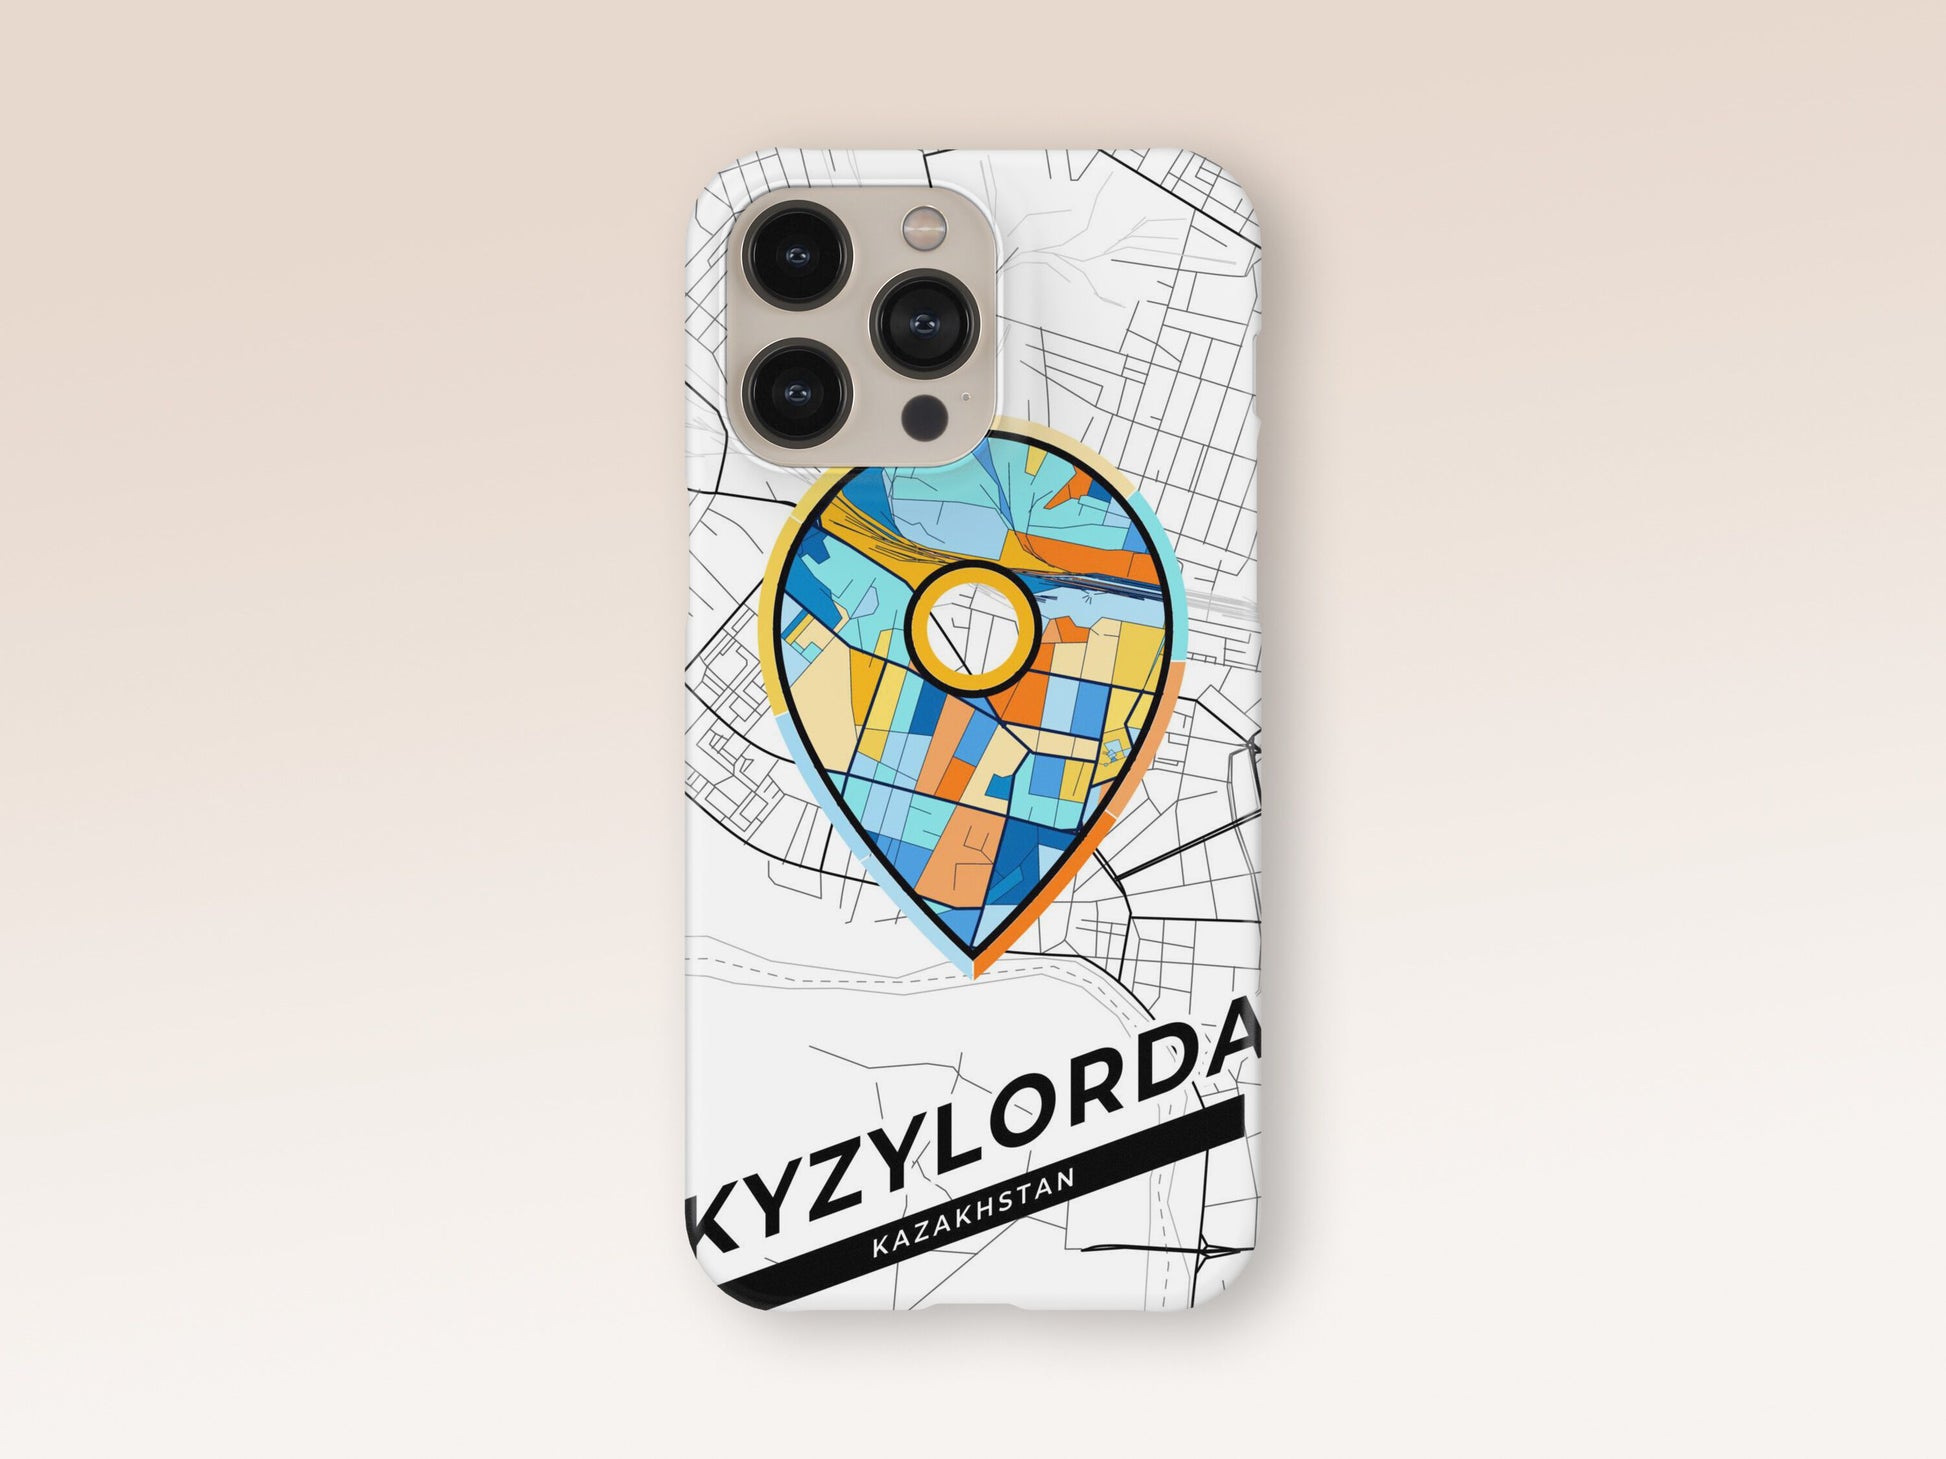 Kyzylorda Kazakhstan slim phone case with colorful icon. Birthday, wedding or housewarming gift. Couple match cases. 1